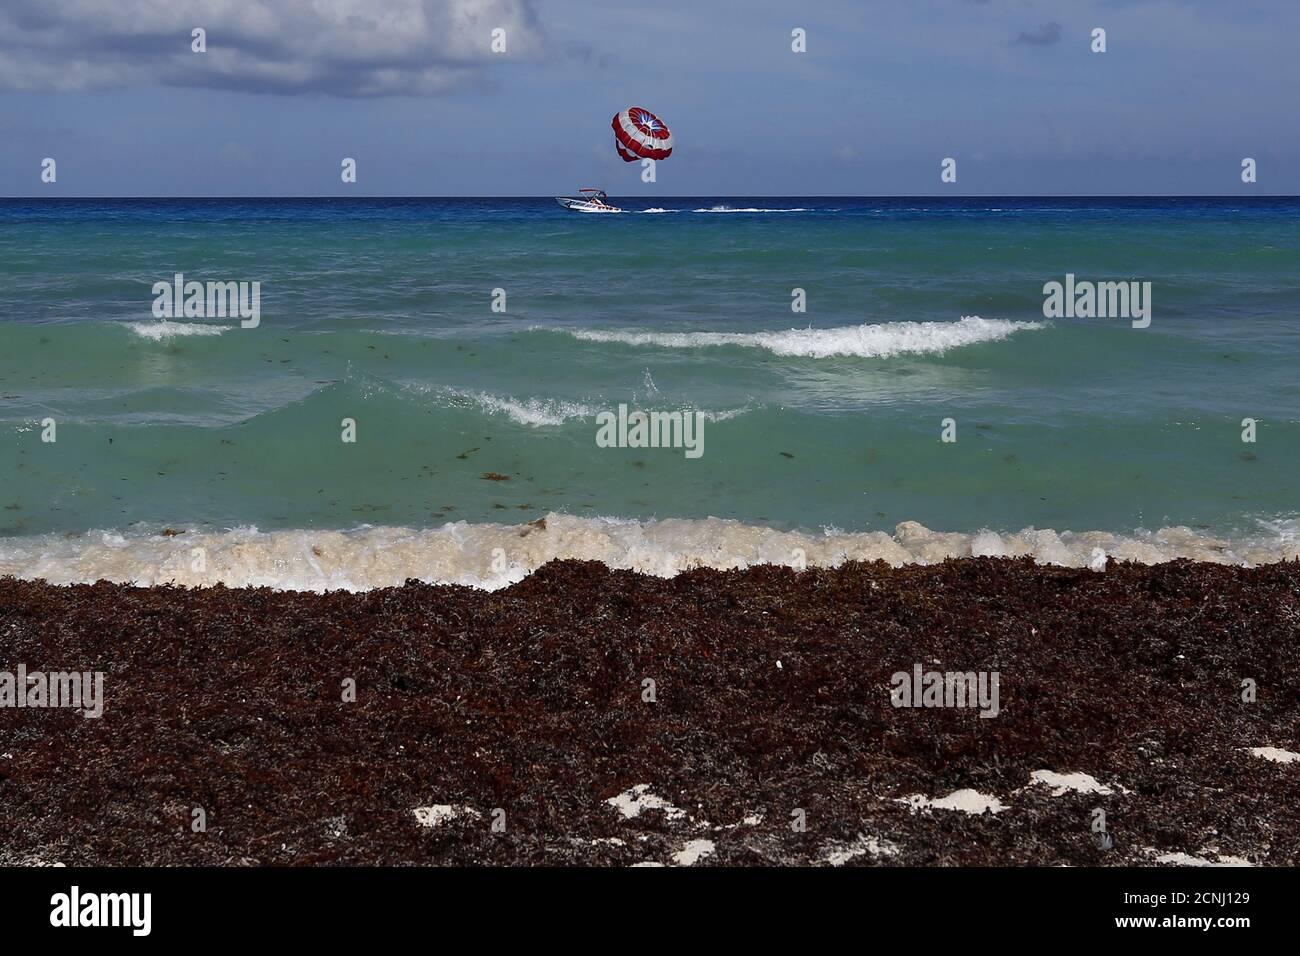 Sargassum algae is seen on a beach in Cancun, August 11, 2015. The Sargassum algae contains biting sand fleas and releases a pungent smell as it decomposes. It has choked beaches in resorts throughout the Caribbean including Cancun this season, prompting local authorities to launch a large-scale clean-up operation.  REUTERS/Edgard Garrido PICTURE 7 OF 34 FOR WIDER IMAGE STORY 'EARTHPRINTS: CANCUN'SEARCH 'EARTHPRINTS CANCUN' FOR ALL IMAGES Stock Photo